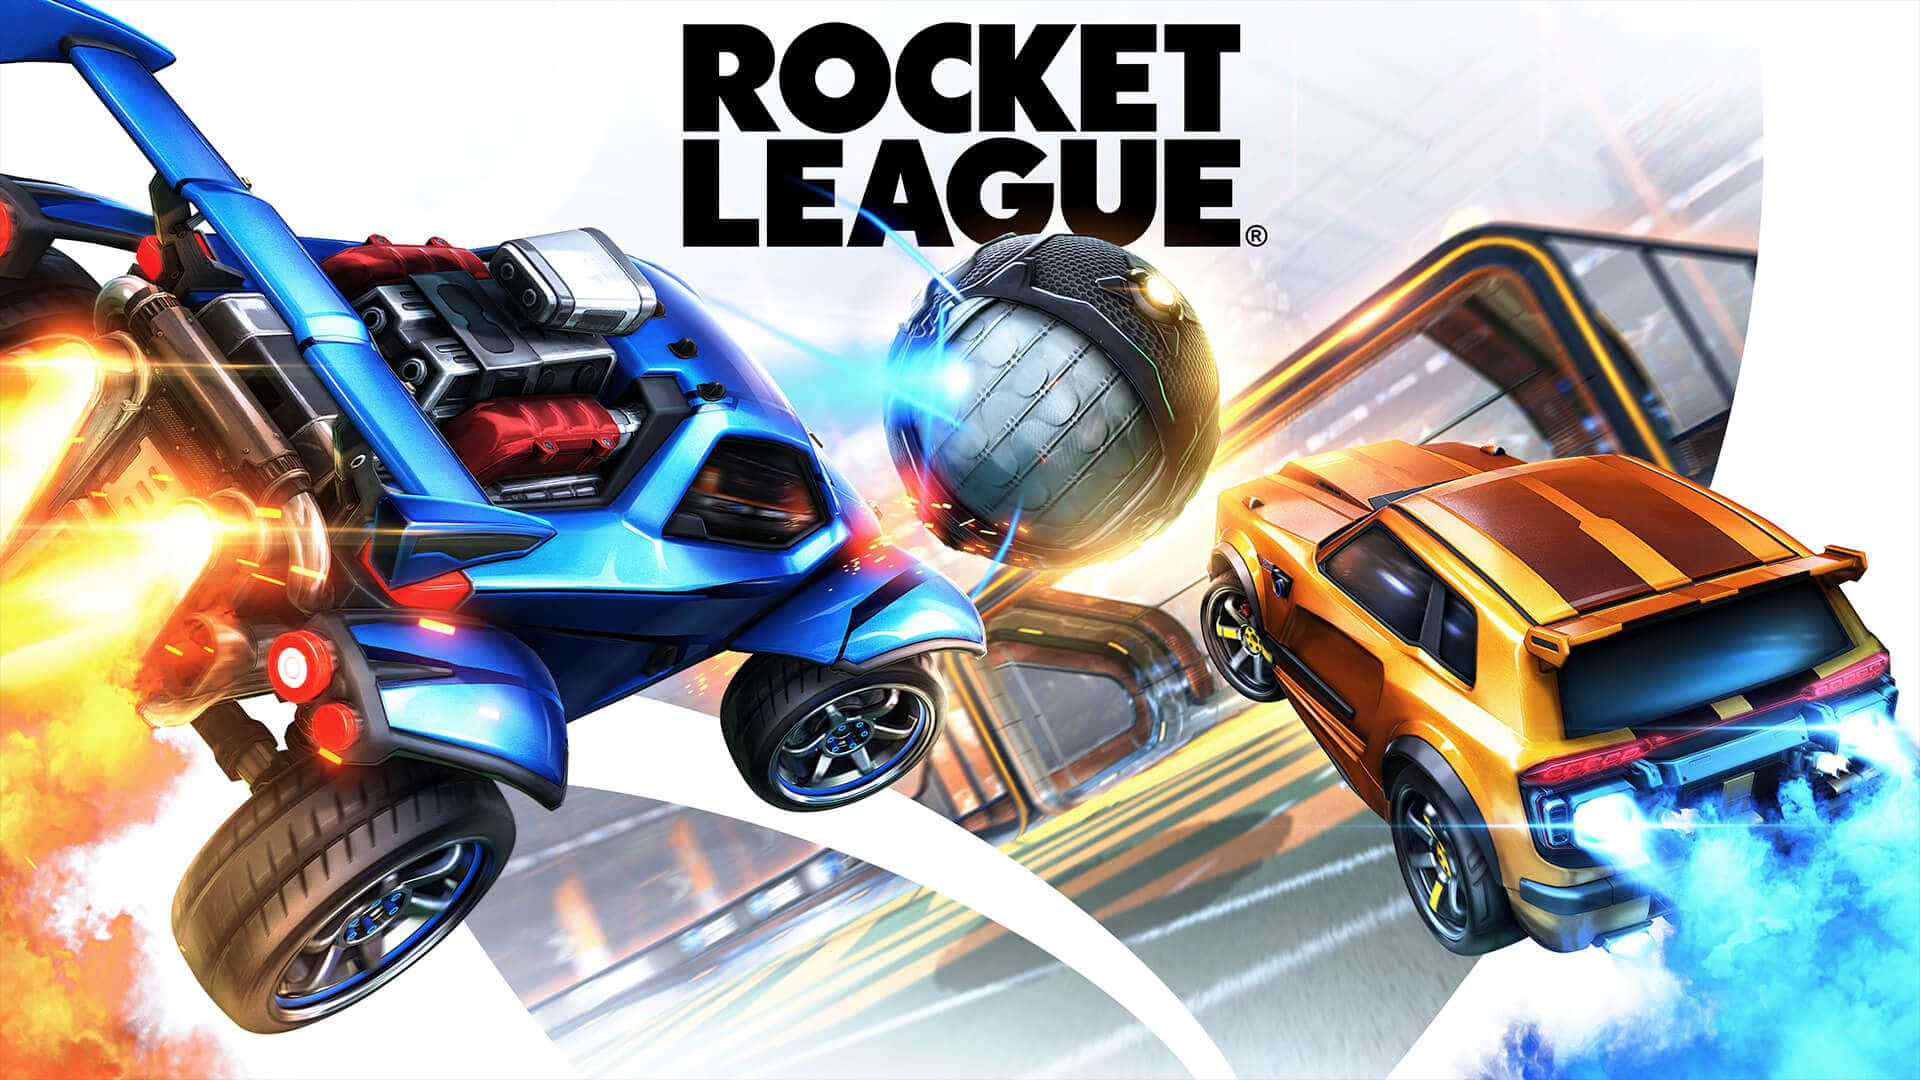 Experience the thrill of high-octane competitive sports with Rocket League